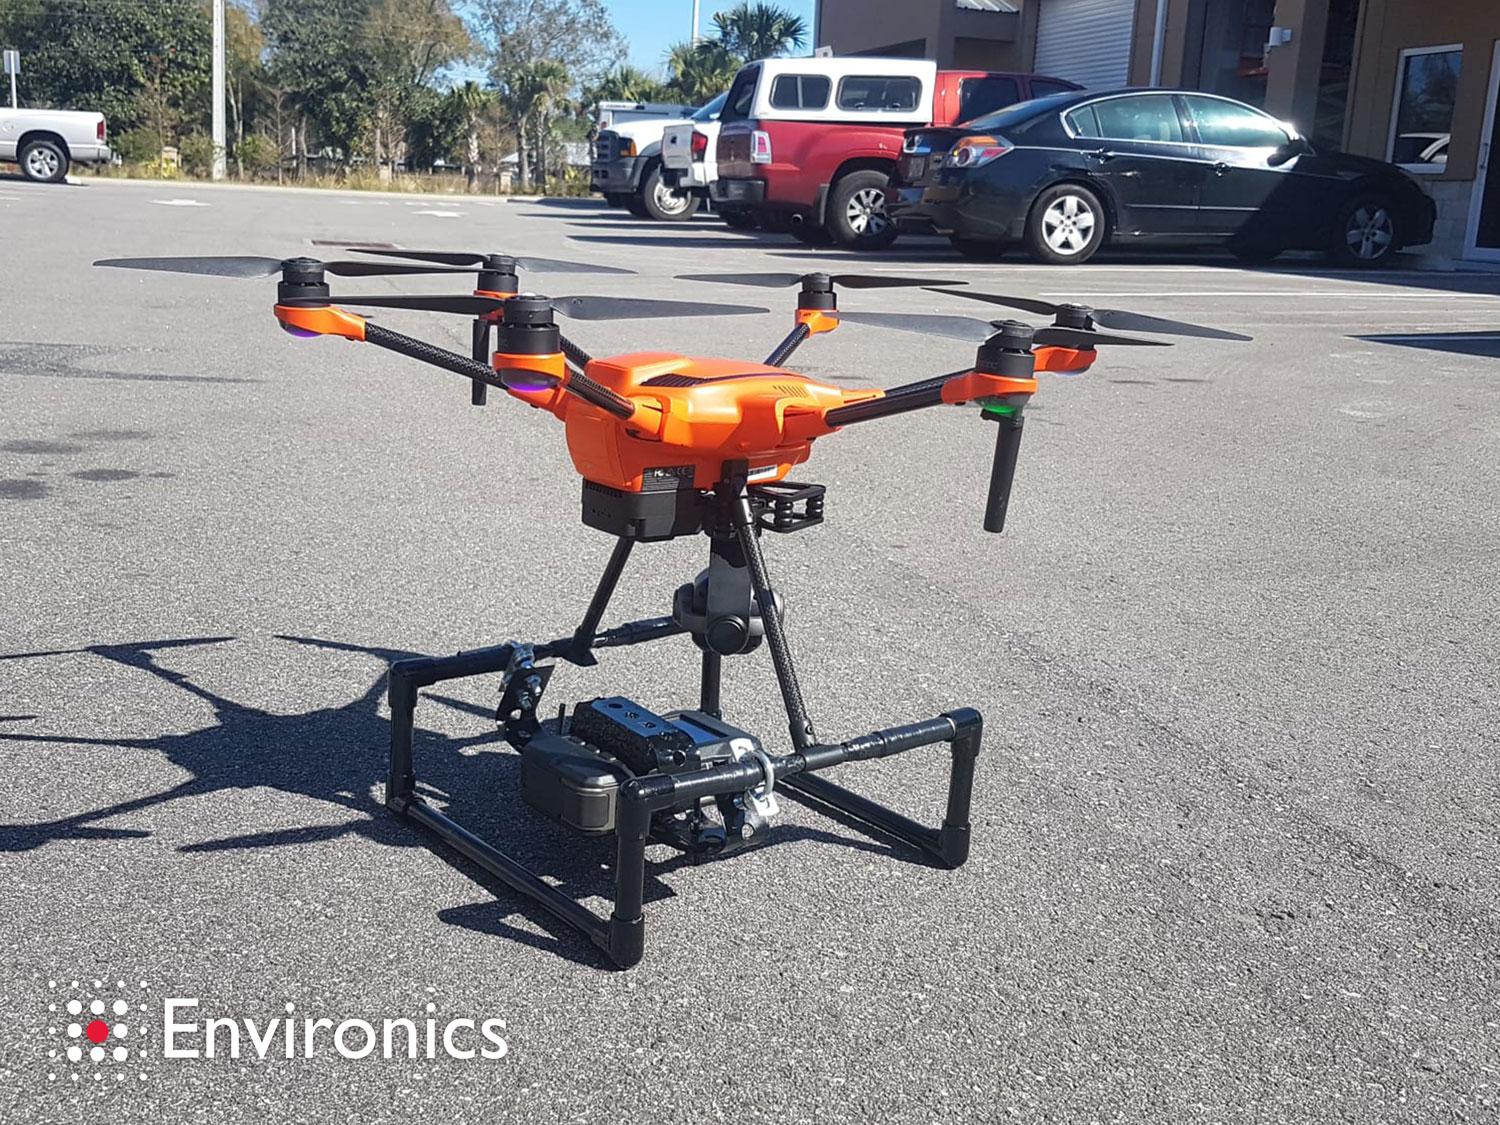 ChemProX mounted onto a drone (unmanned aerial vehicle)